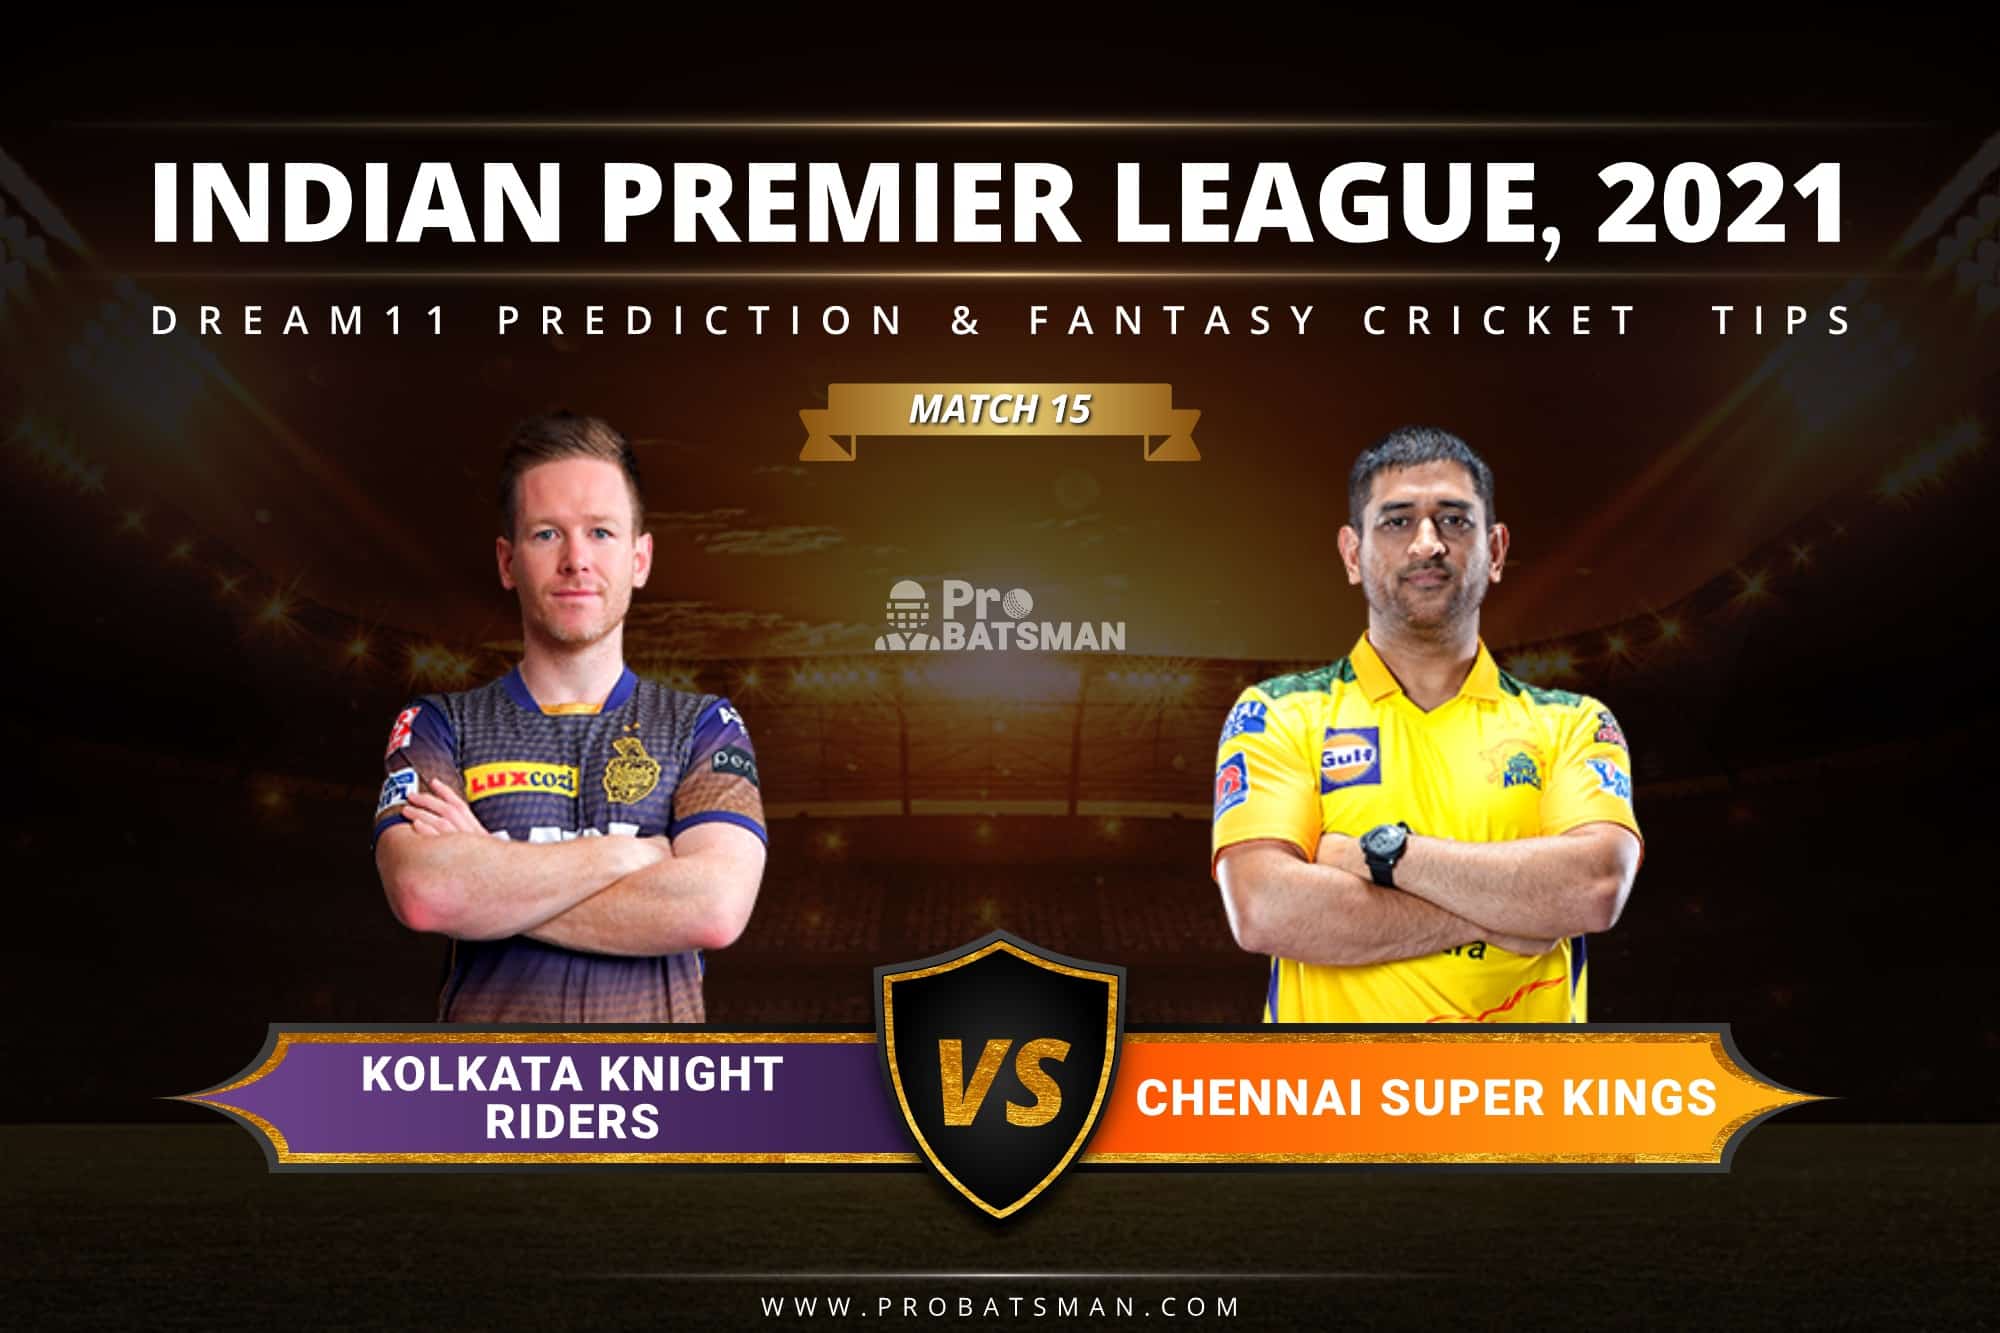 KKR vs CSK Dream11 Prediction: Fantasy Cricket Tips, Playing XI, Pitch Report, Stats & Injury Updates of Match 15, IPL 2021